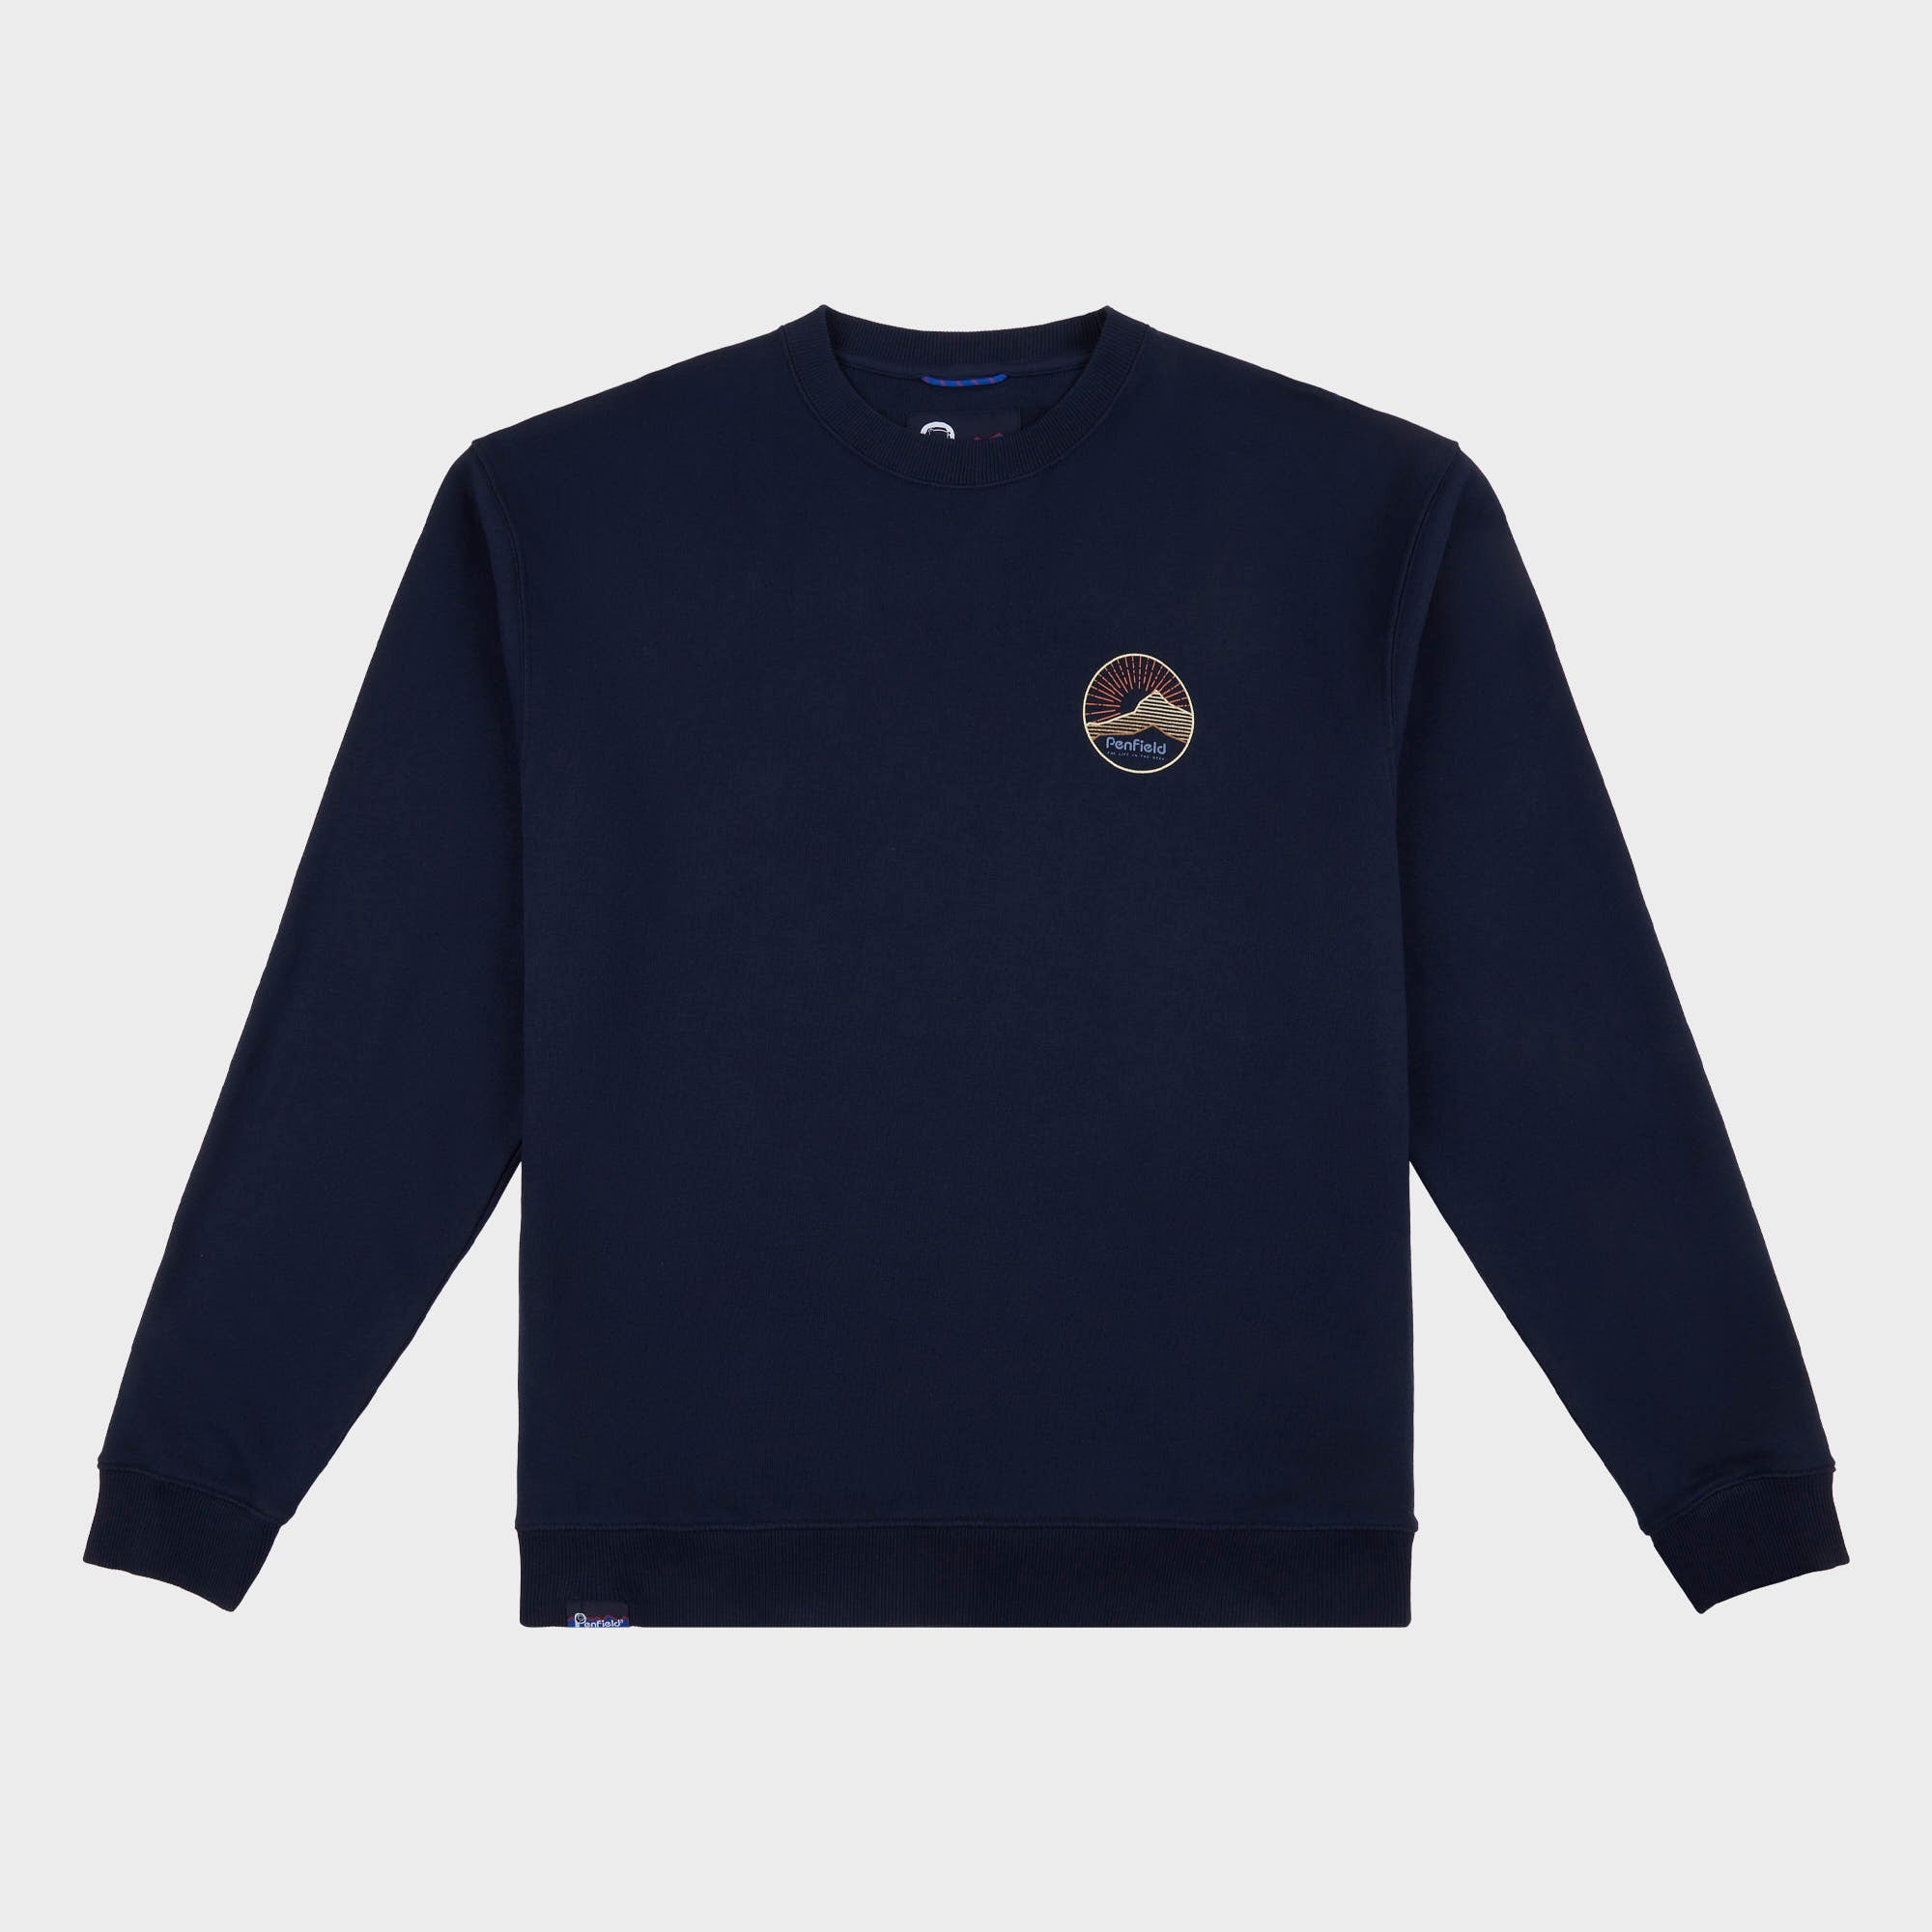 Relaxed Fit Circle Mountain Sweatshirt in Navy Blue